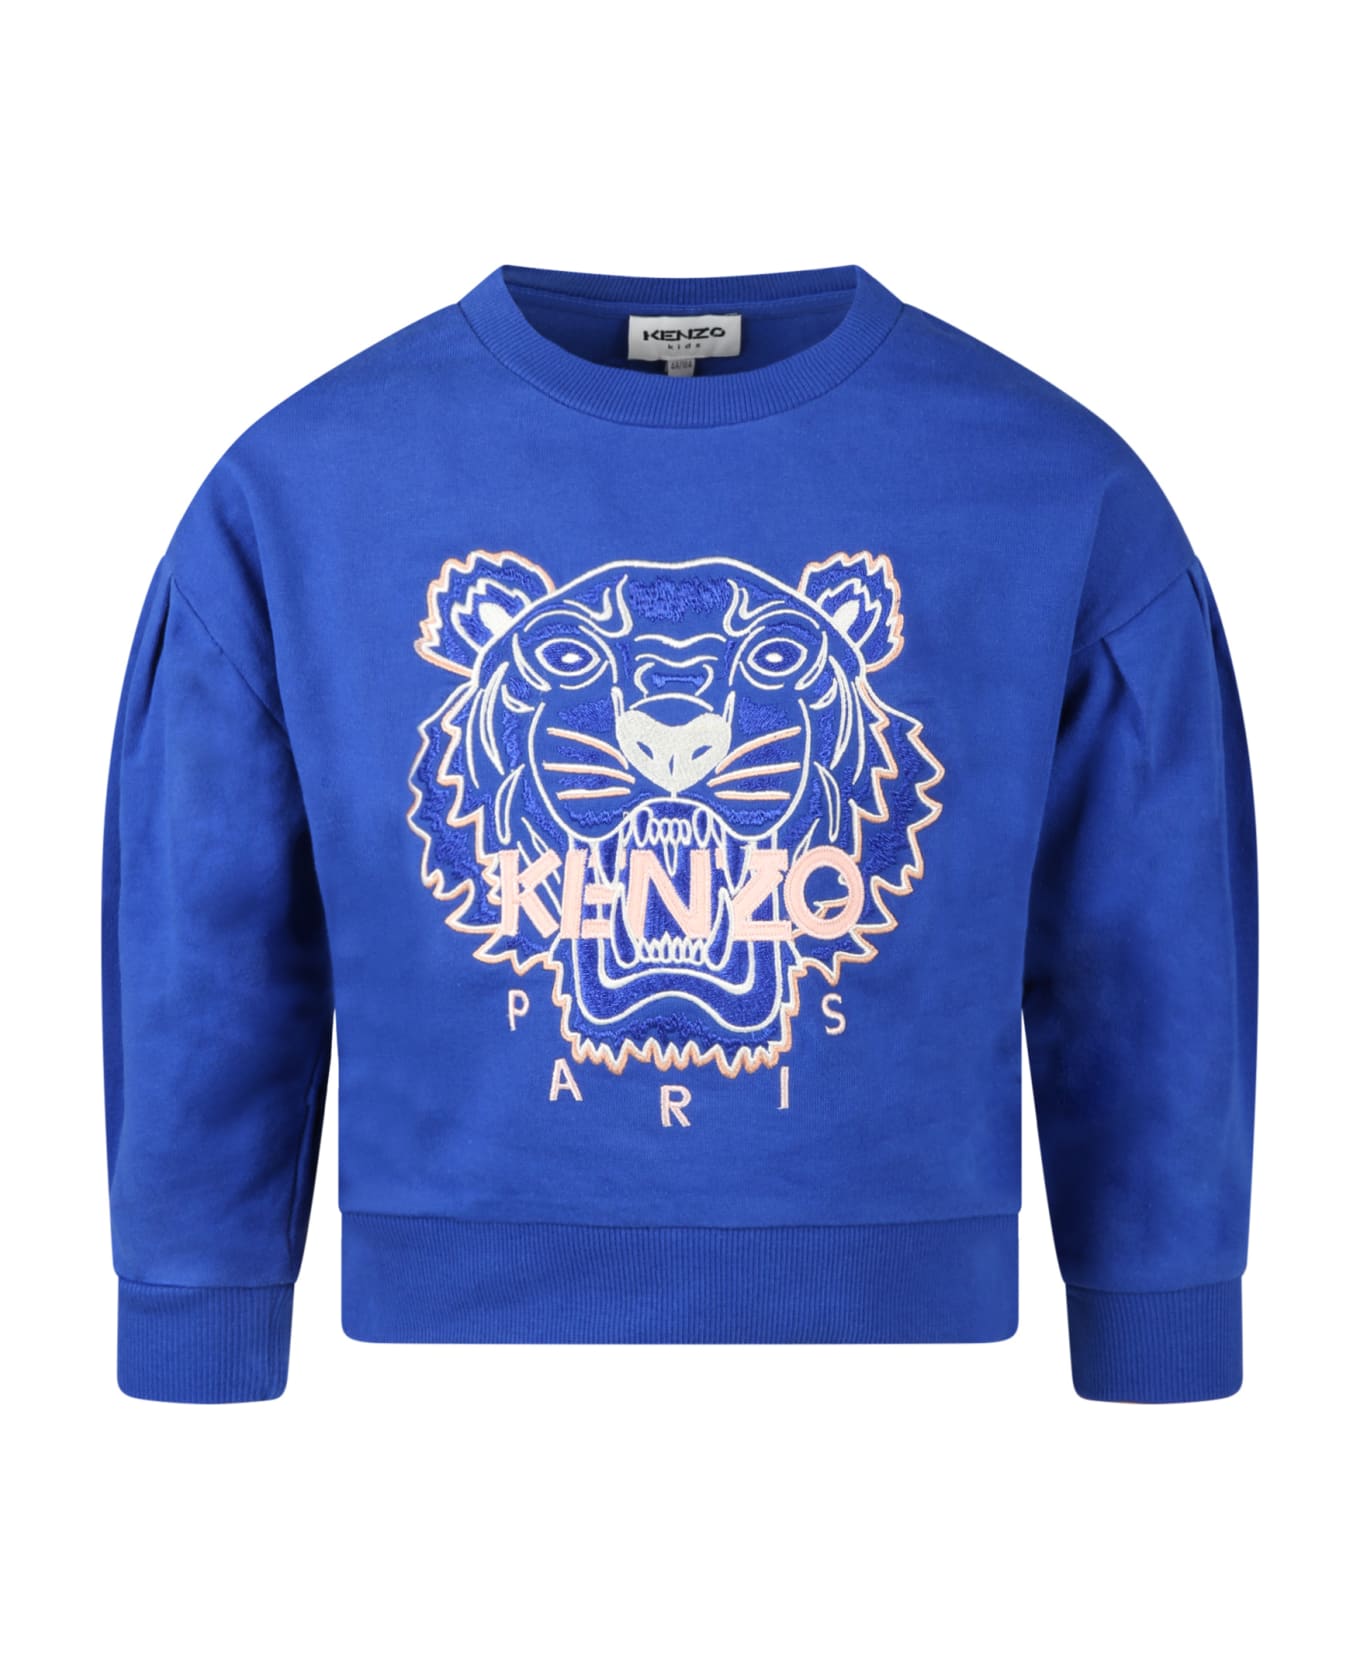 Kenzo Kids Blue Sweatshirt For Baby Girl With Tiger - Blue